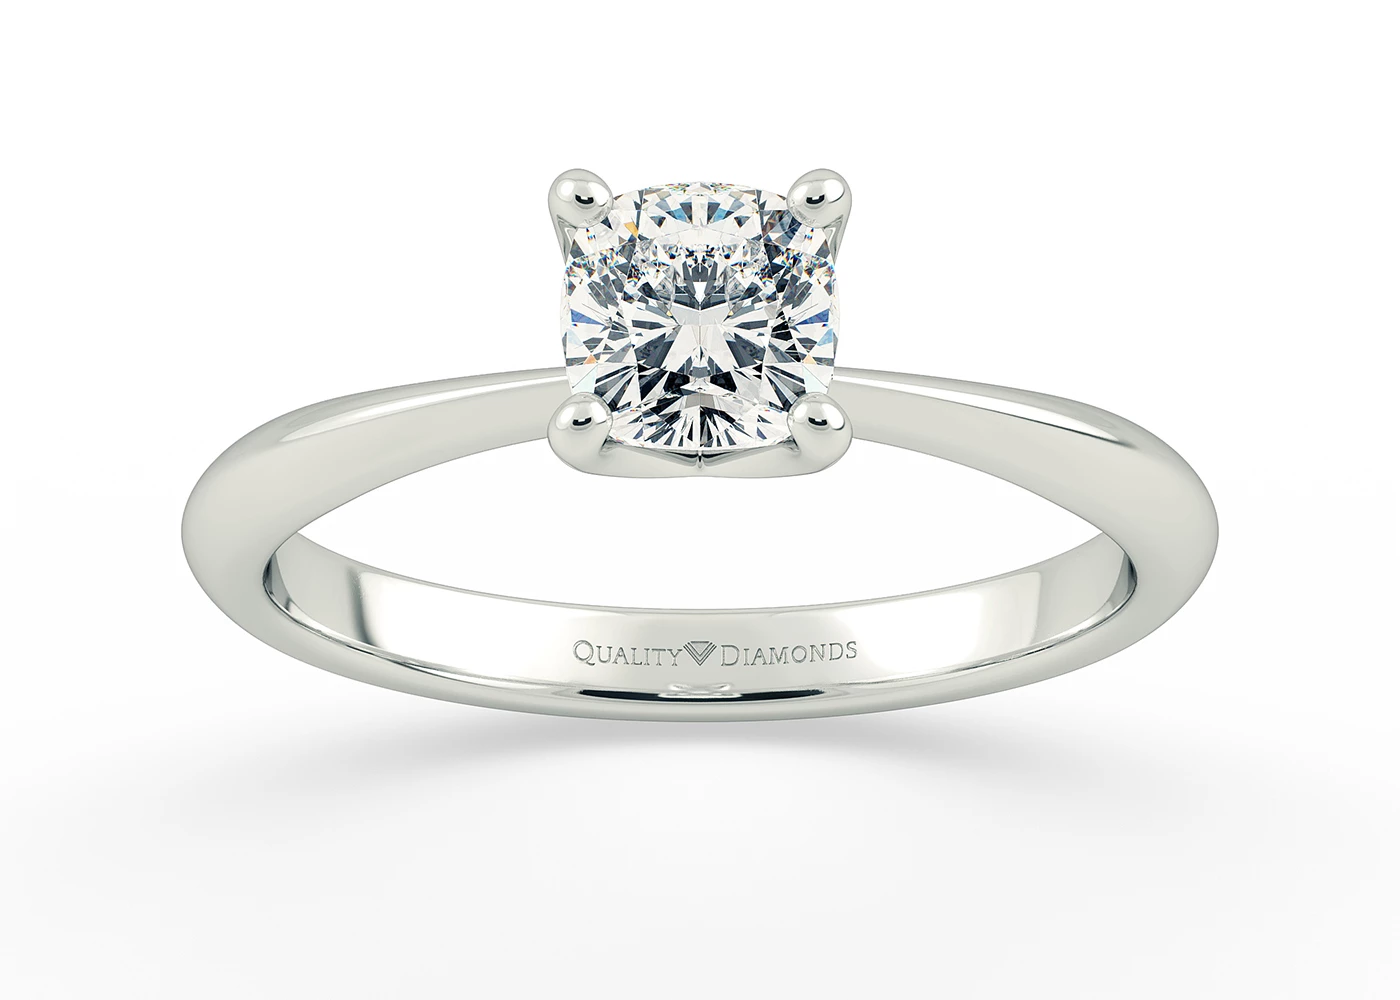 Two Carat Cushion Solitaire Diamond Engagement Ring in 18K White Gold